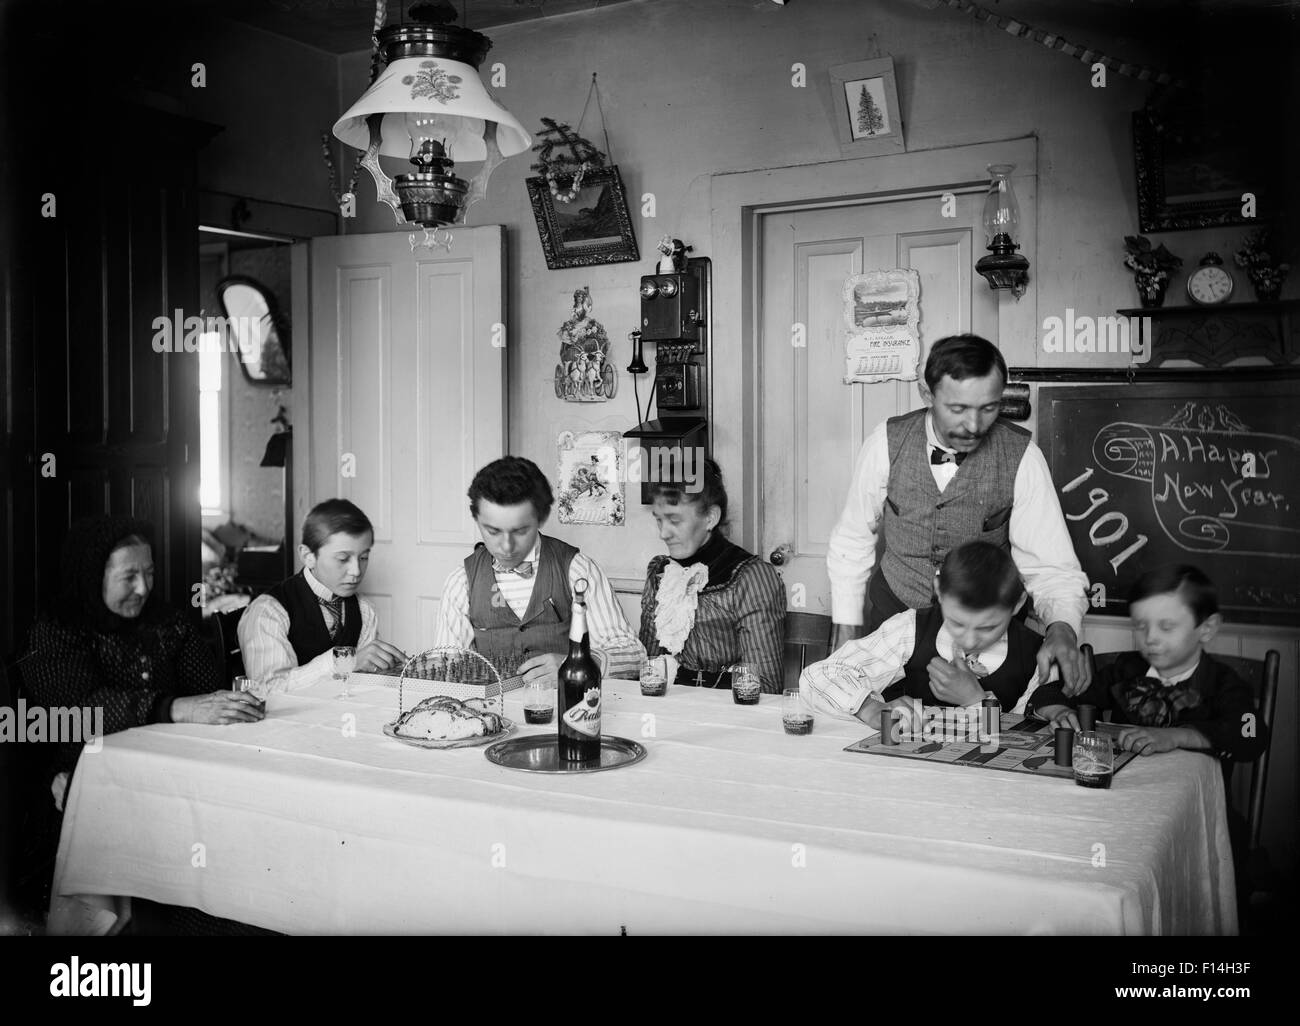 1900s 1901 TURN OF 20 CENTURY FAMILY THREE GENERATIONS AT KITCHEN TABLE  NEW YEARS CELEBRATION Stock Photo